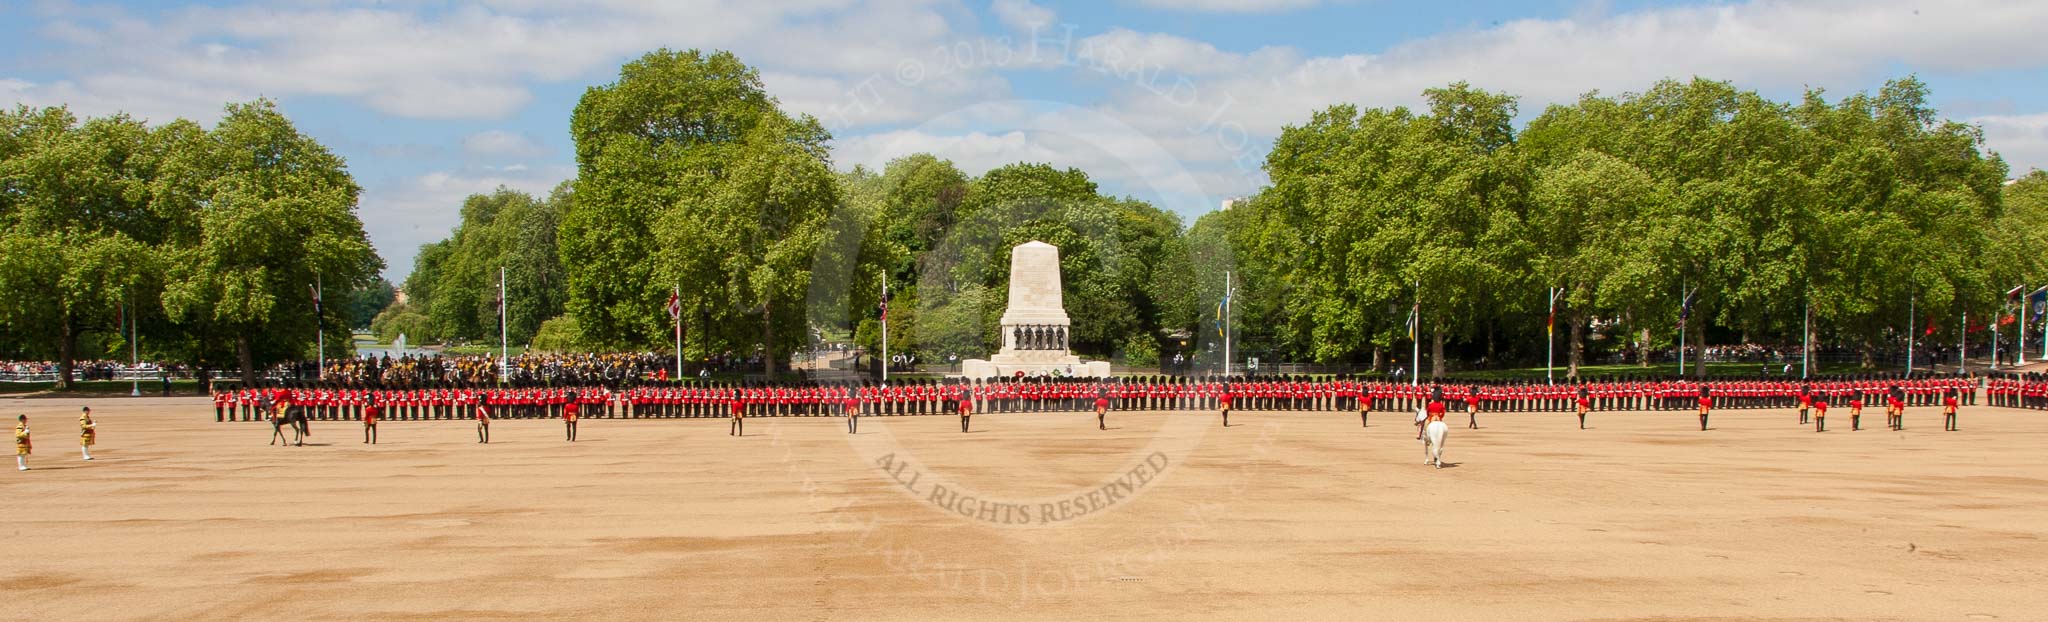 The Colonel's Review 2013: The eighteen officers are marching back towards their Guards, with the Major of the Parade on their left and the Adjutant of the Parade behind..
Horse Guards Parade, Westminster,
London SW1,

United Kingdom,
on 08 June 2013 at 10:41, image #198